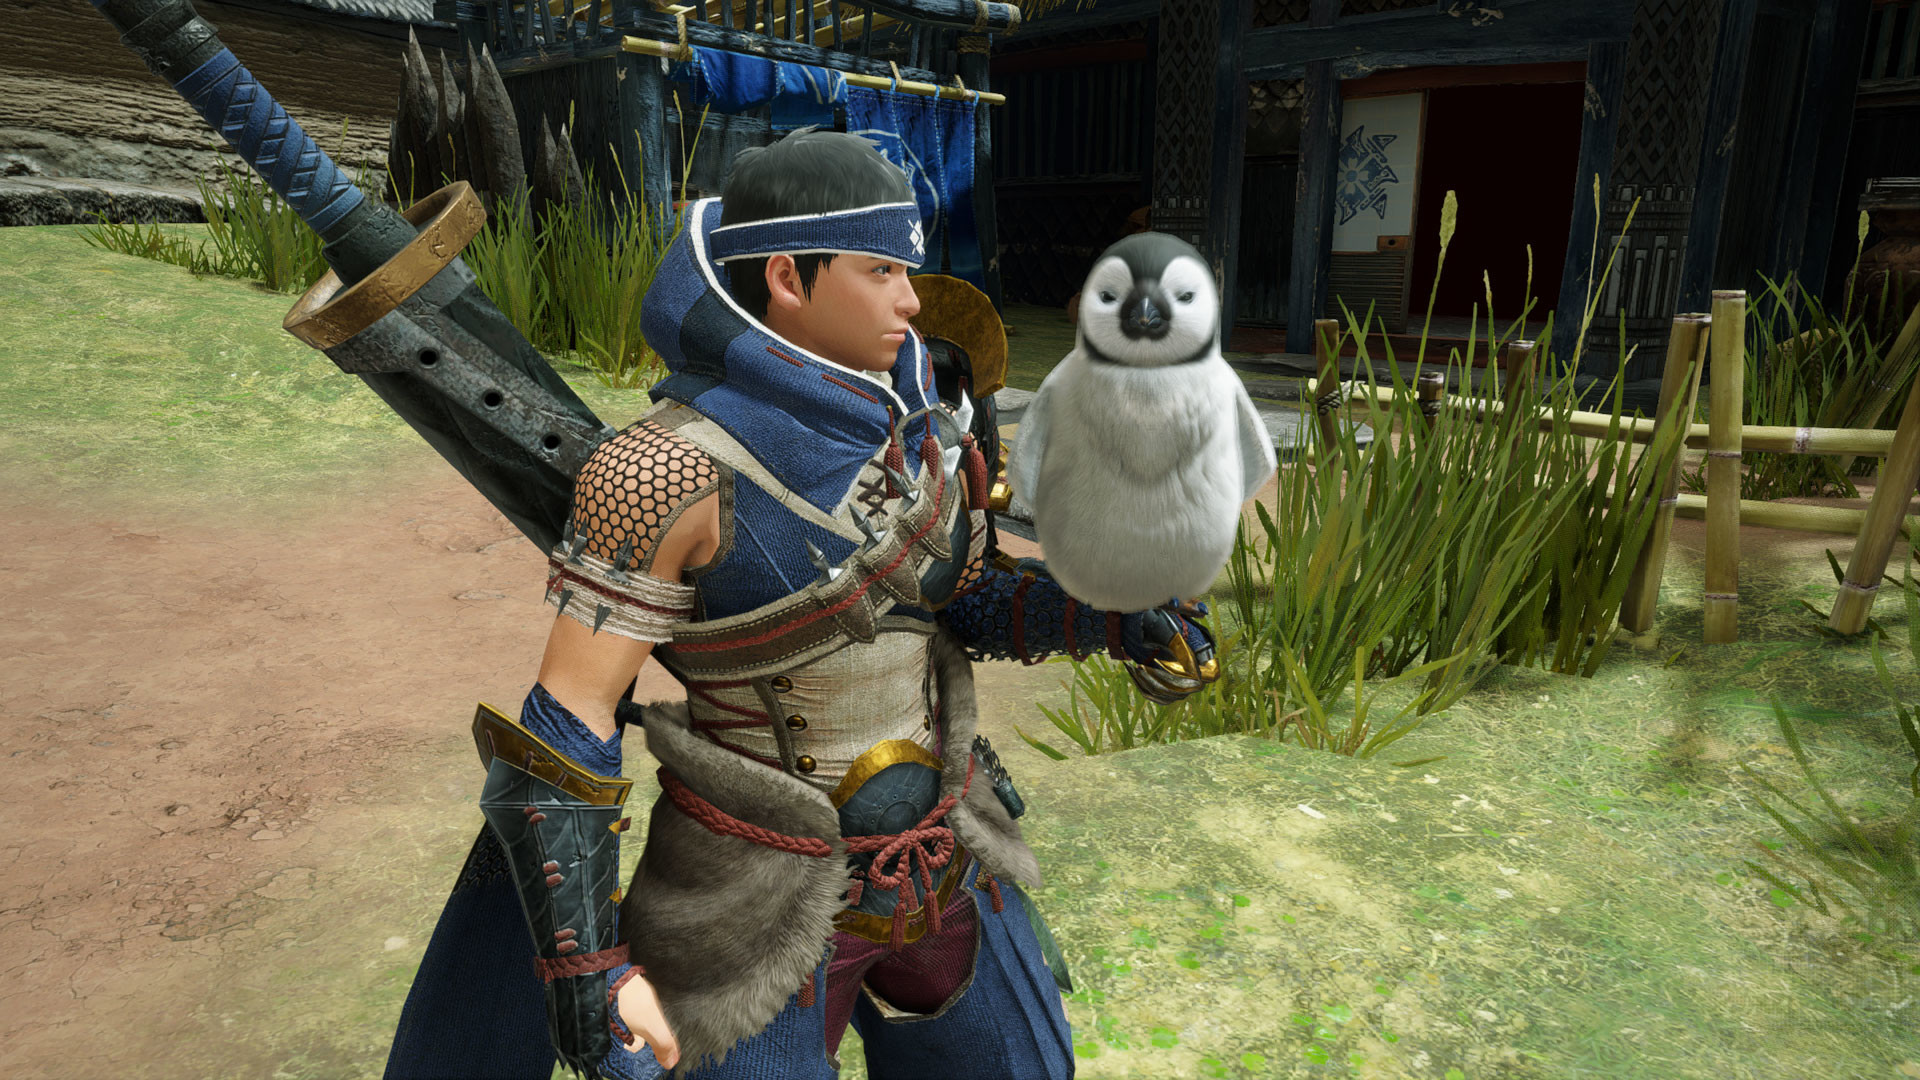 MONSTER HUNTER RISE - "Puffy Penguin" Cohoot outfit Featured Screenshot #1